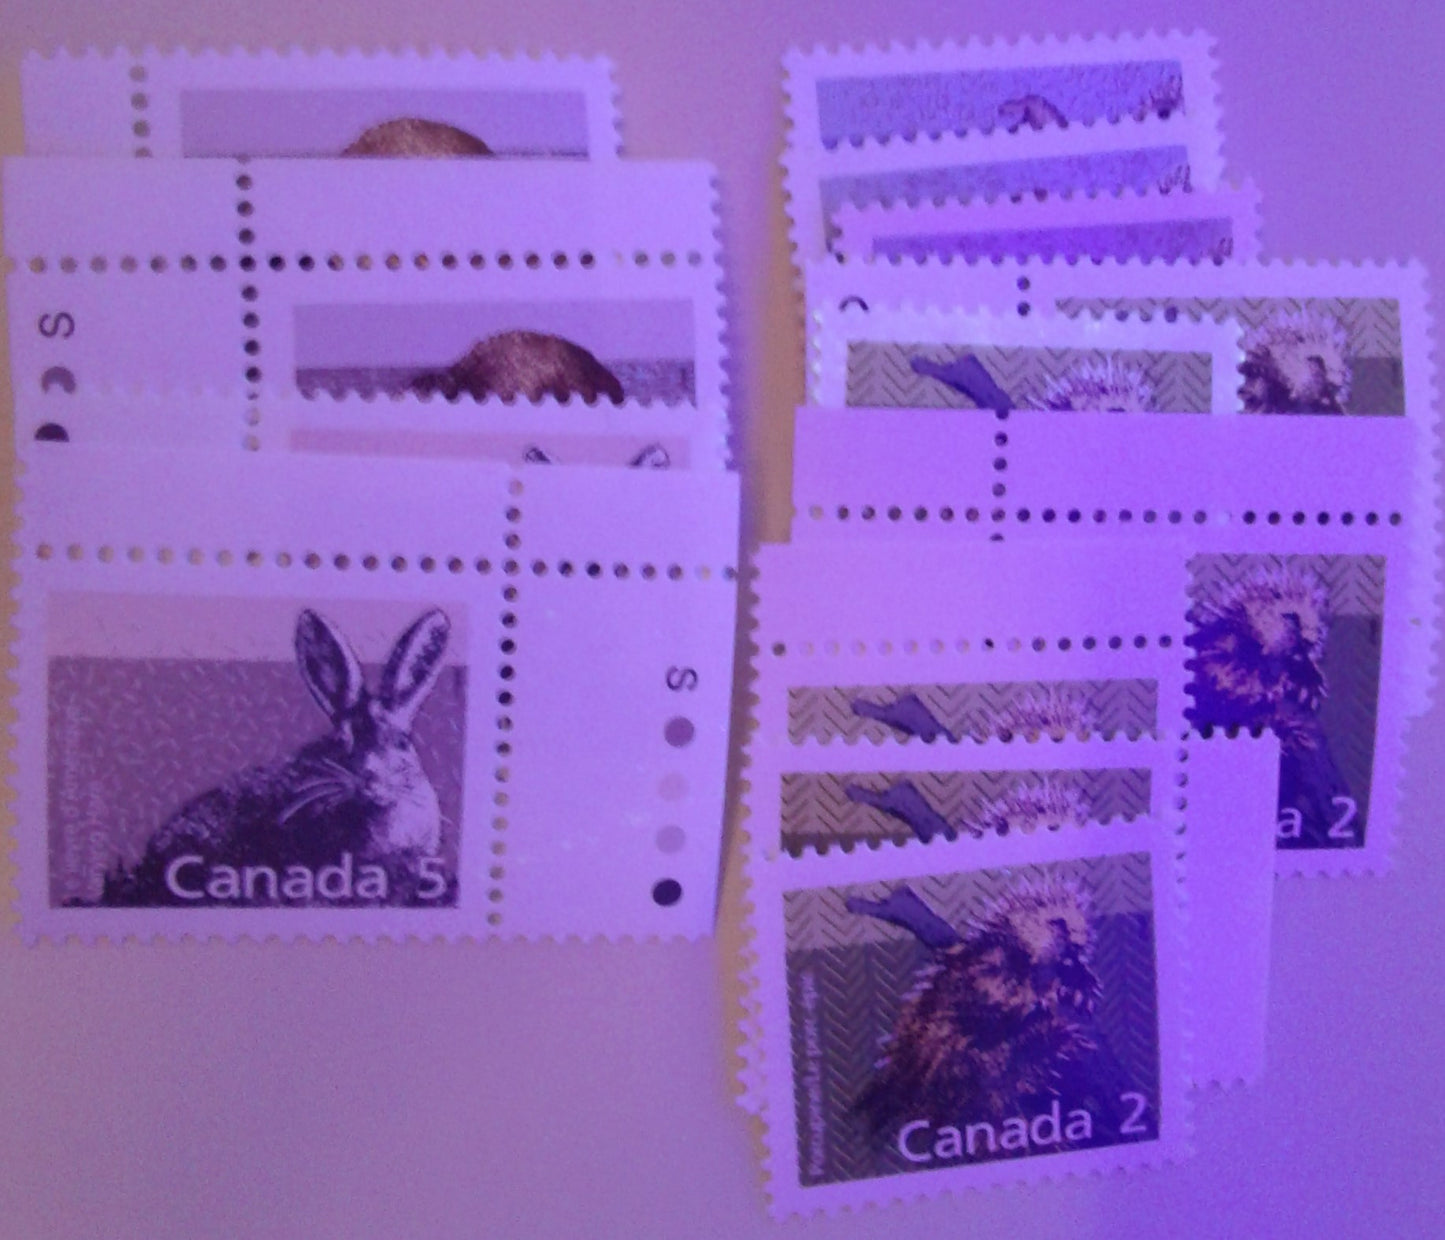 Canada #1180c 80c Peary Caribou 1988-1991 Wildlife and Architecture Issue, VFNH LL Inscription Block on DF/LF Peterborough Paper, Perf. 14.4 x 13.8